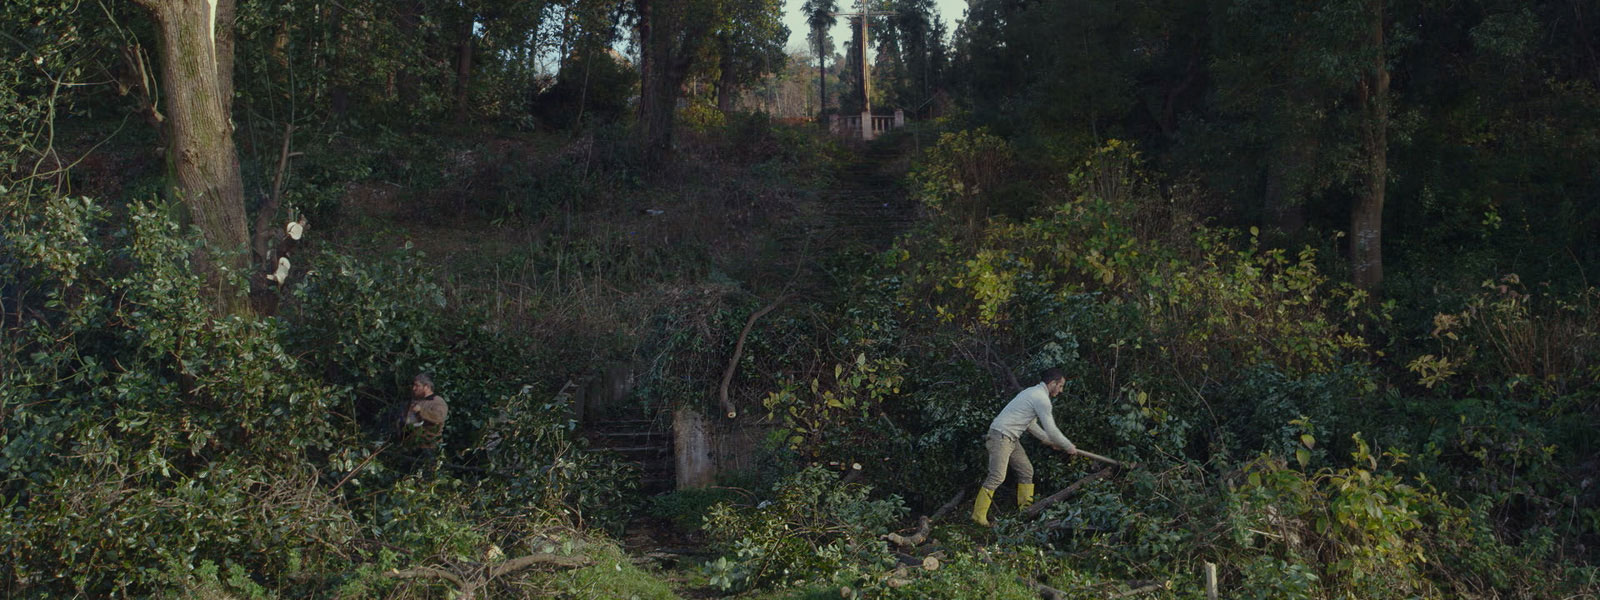 Image from 'Taming the Garden'